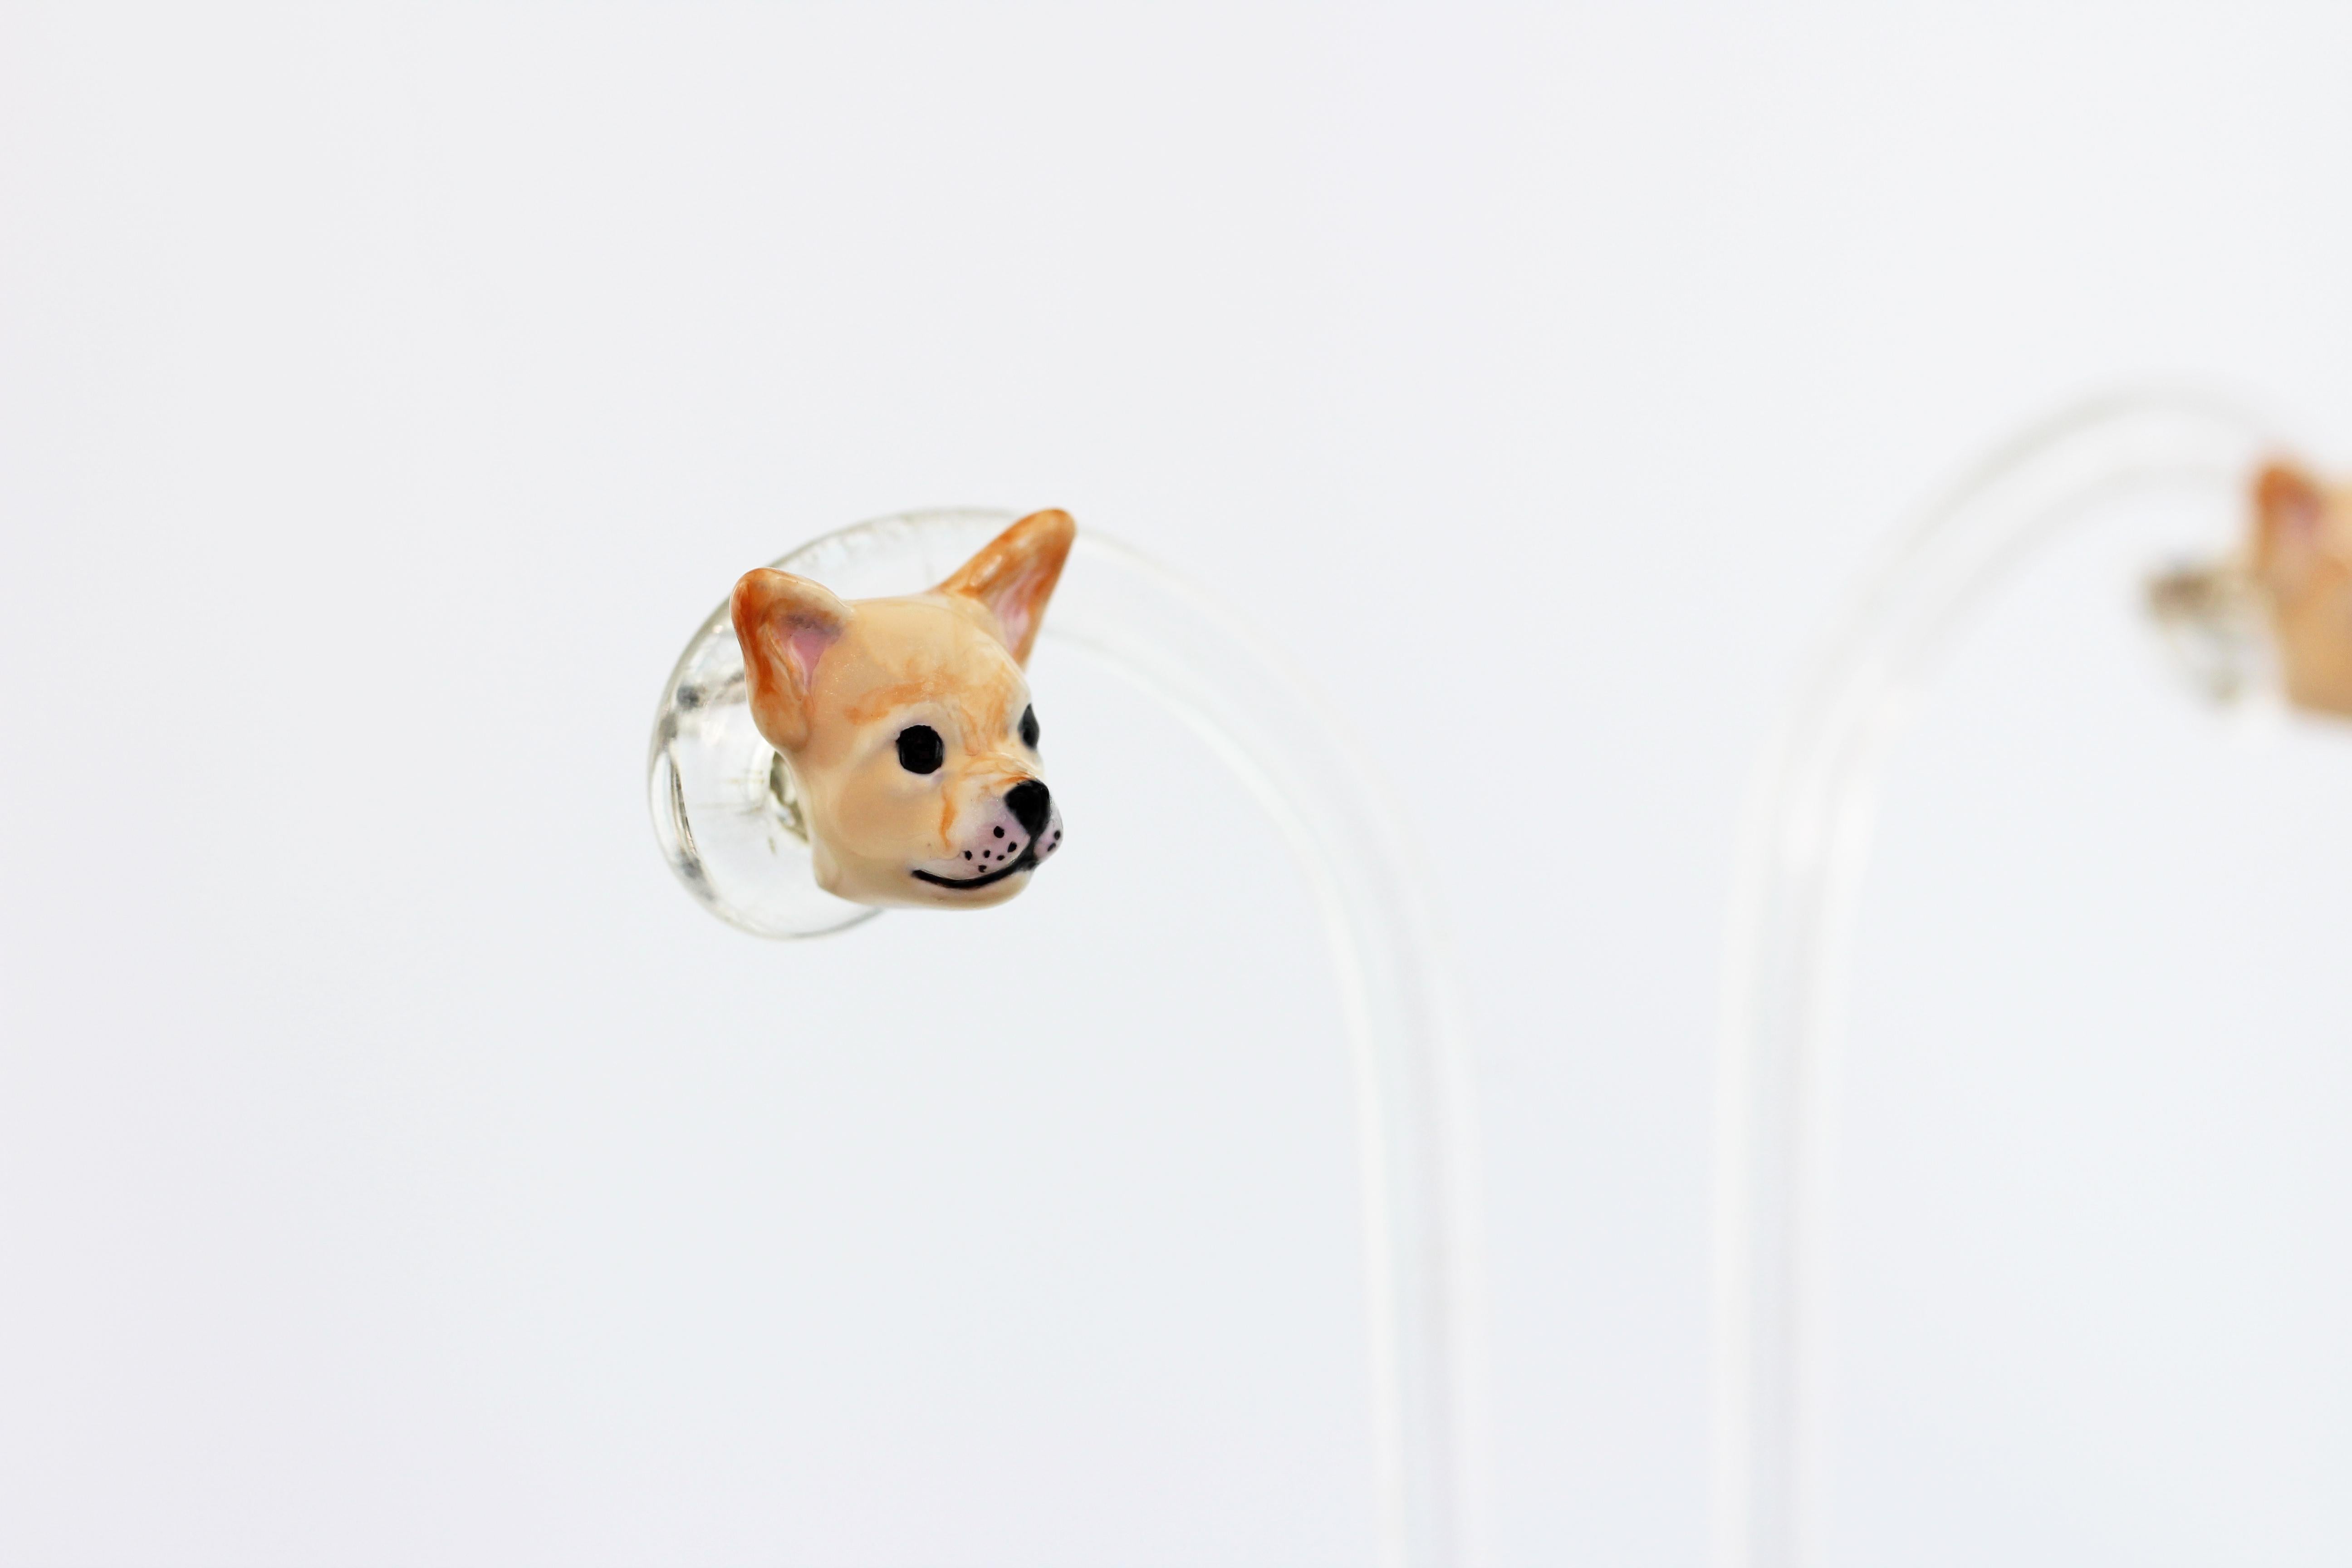 Earrings made in sterling silver 925 featuring a Creamy White Chihuahua, thanks to amazing hand enamel life-like features is vividly rendered.   

The AVGVSTA Dog earrings are hand made and 100% customizable.  

• Depict your dog   
• 925 Sterling